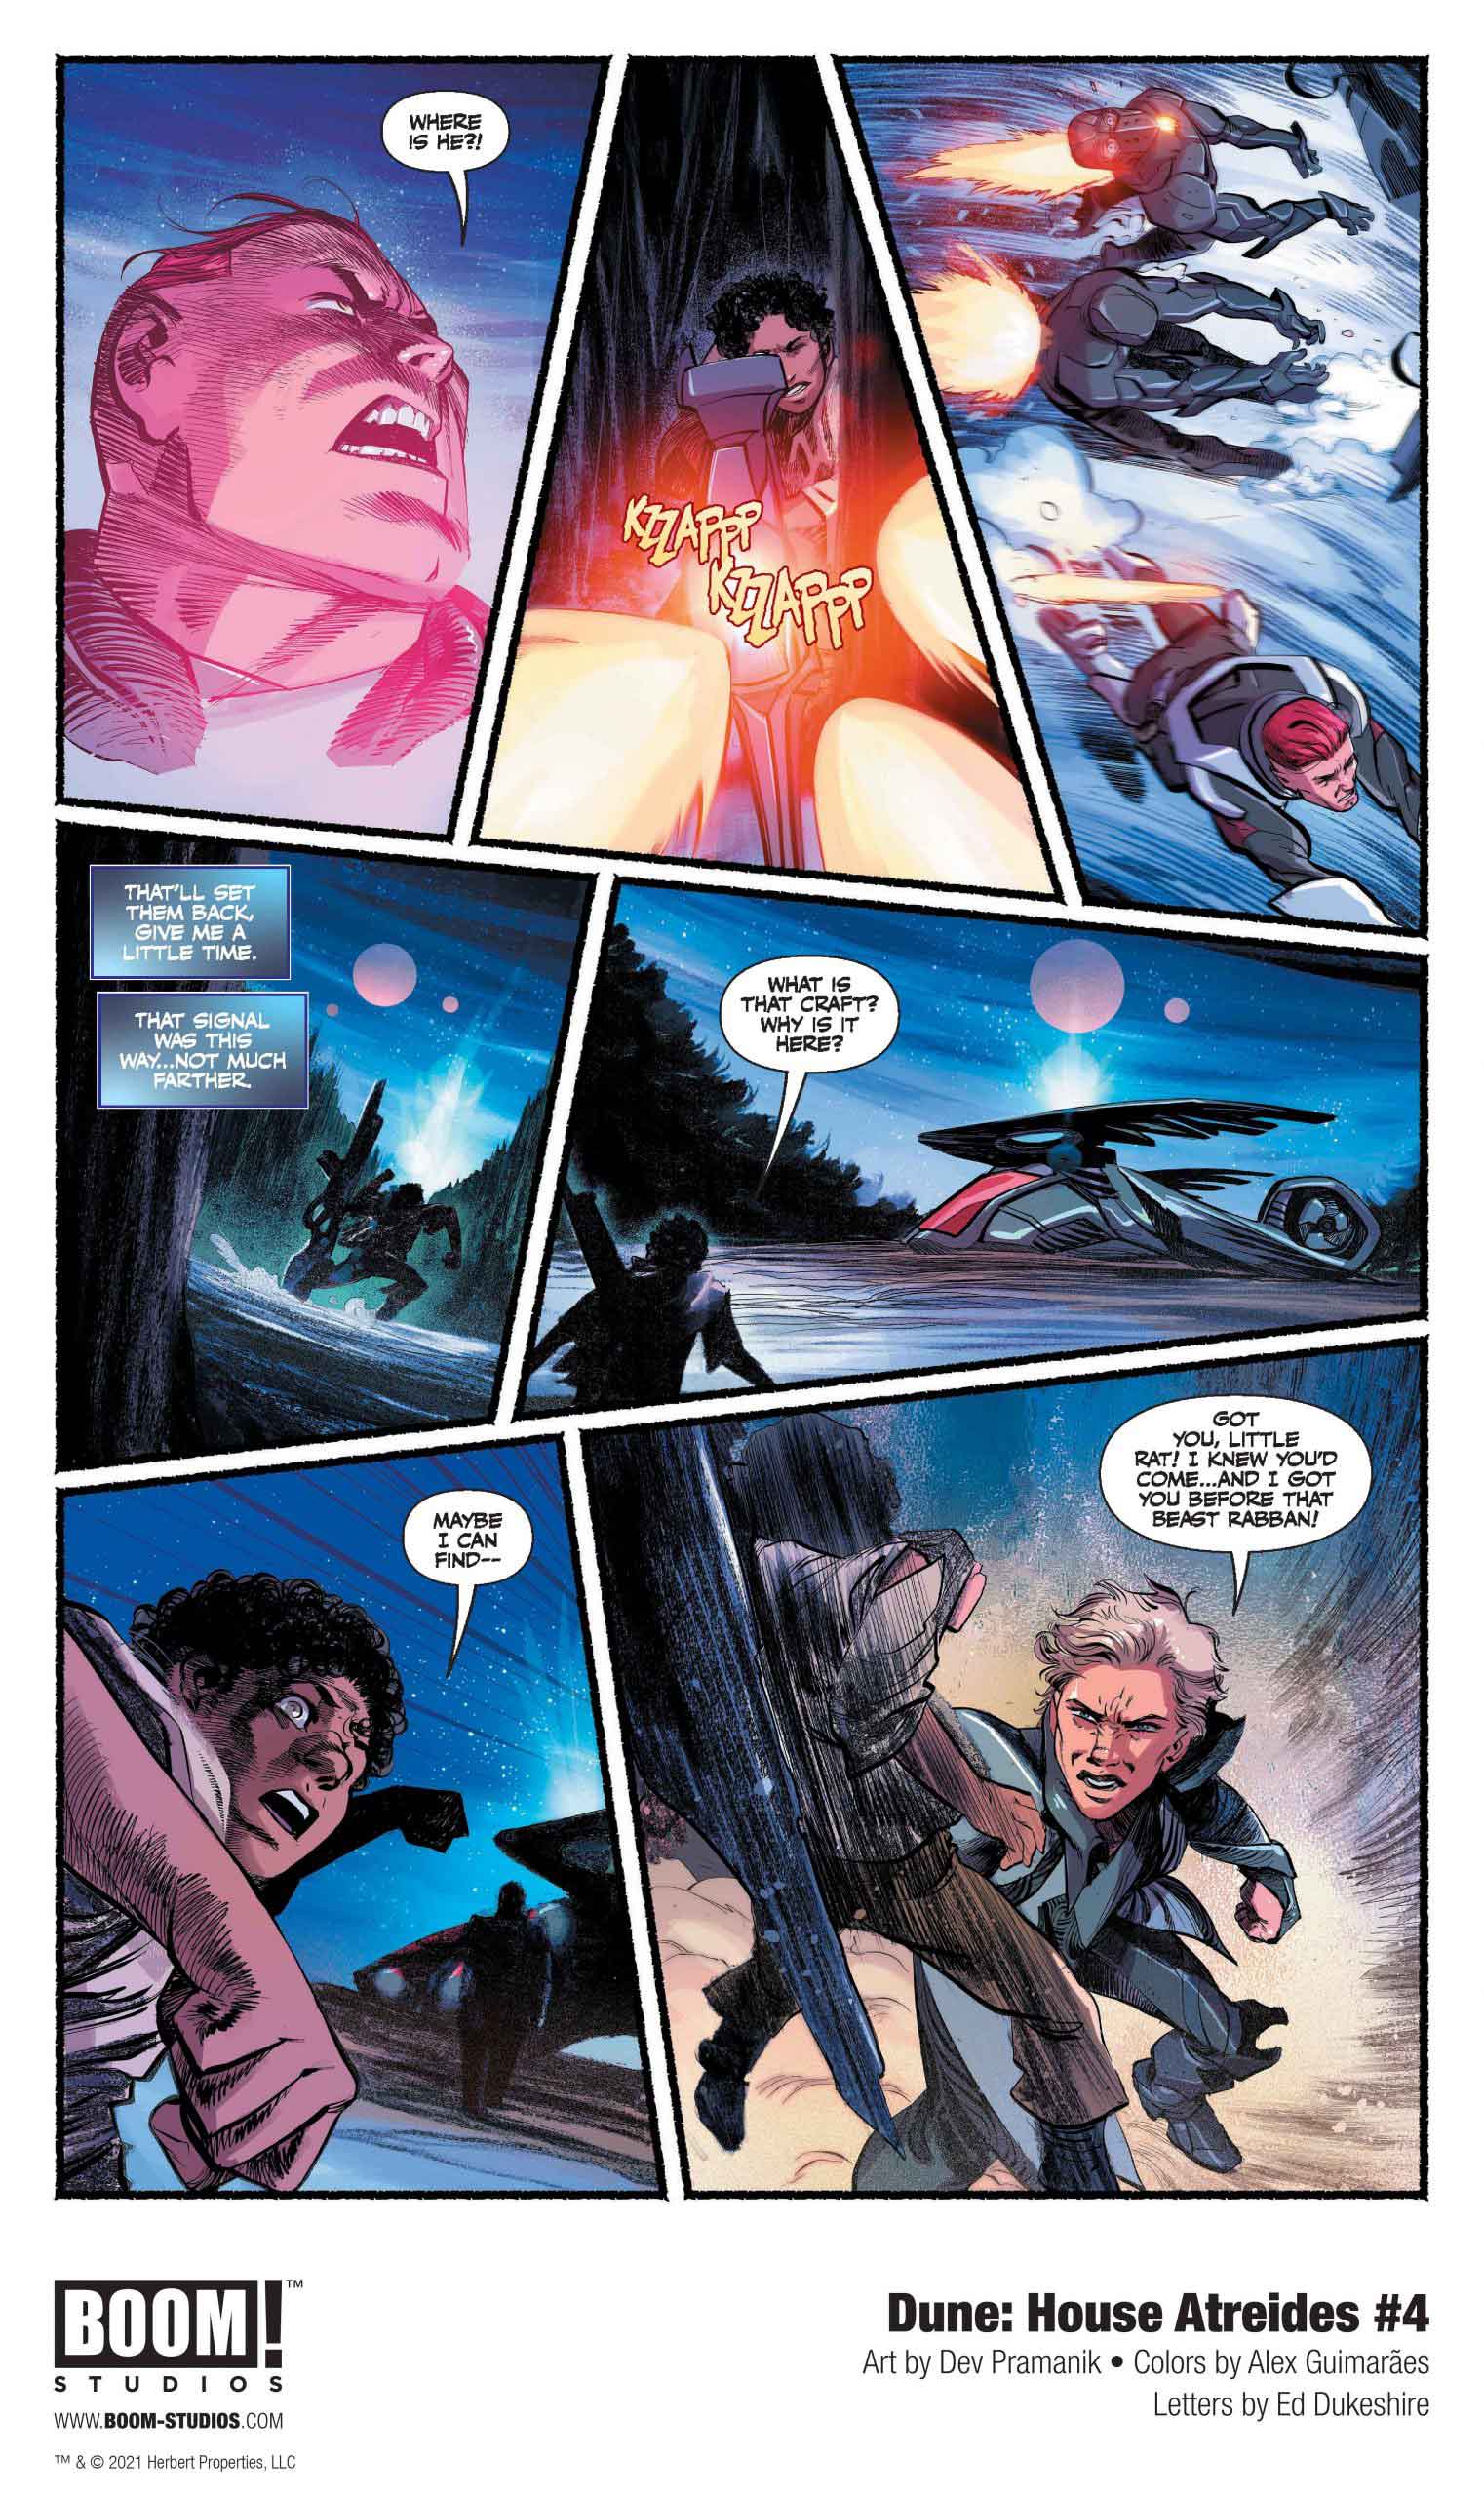 Dune: House Atreides comic series. Issue #4, preview page 4.